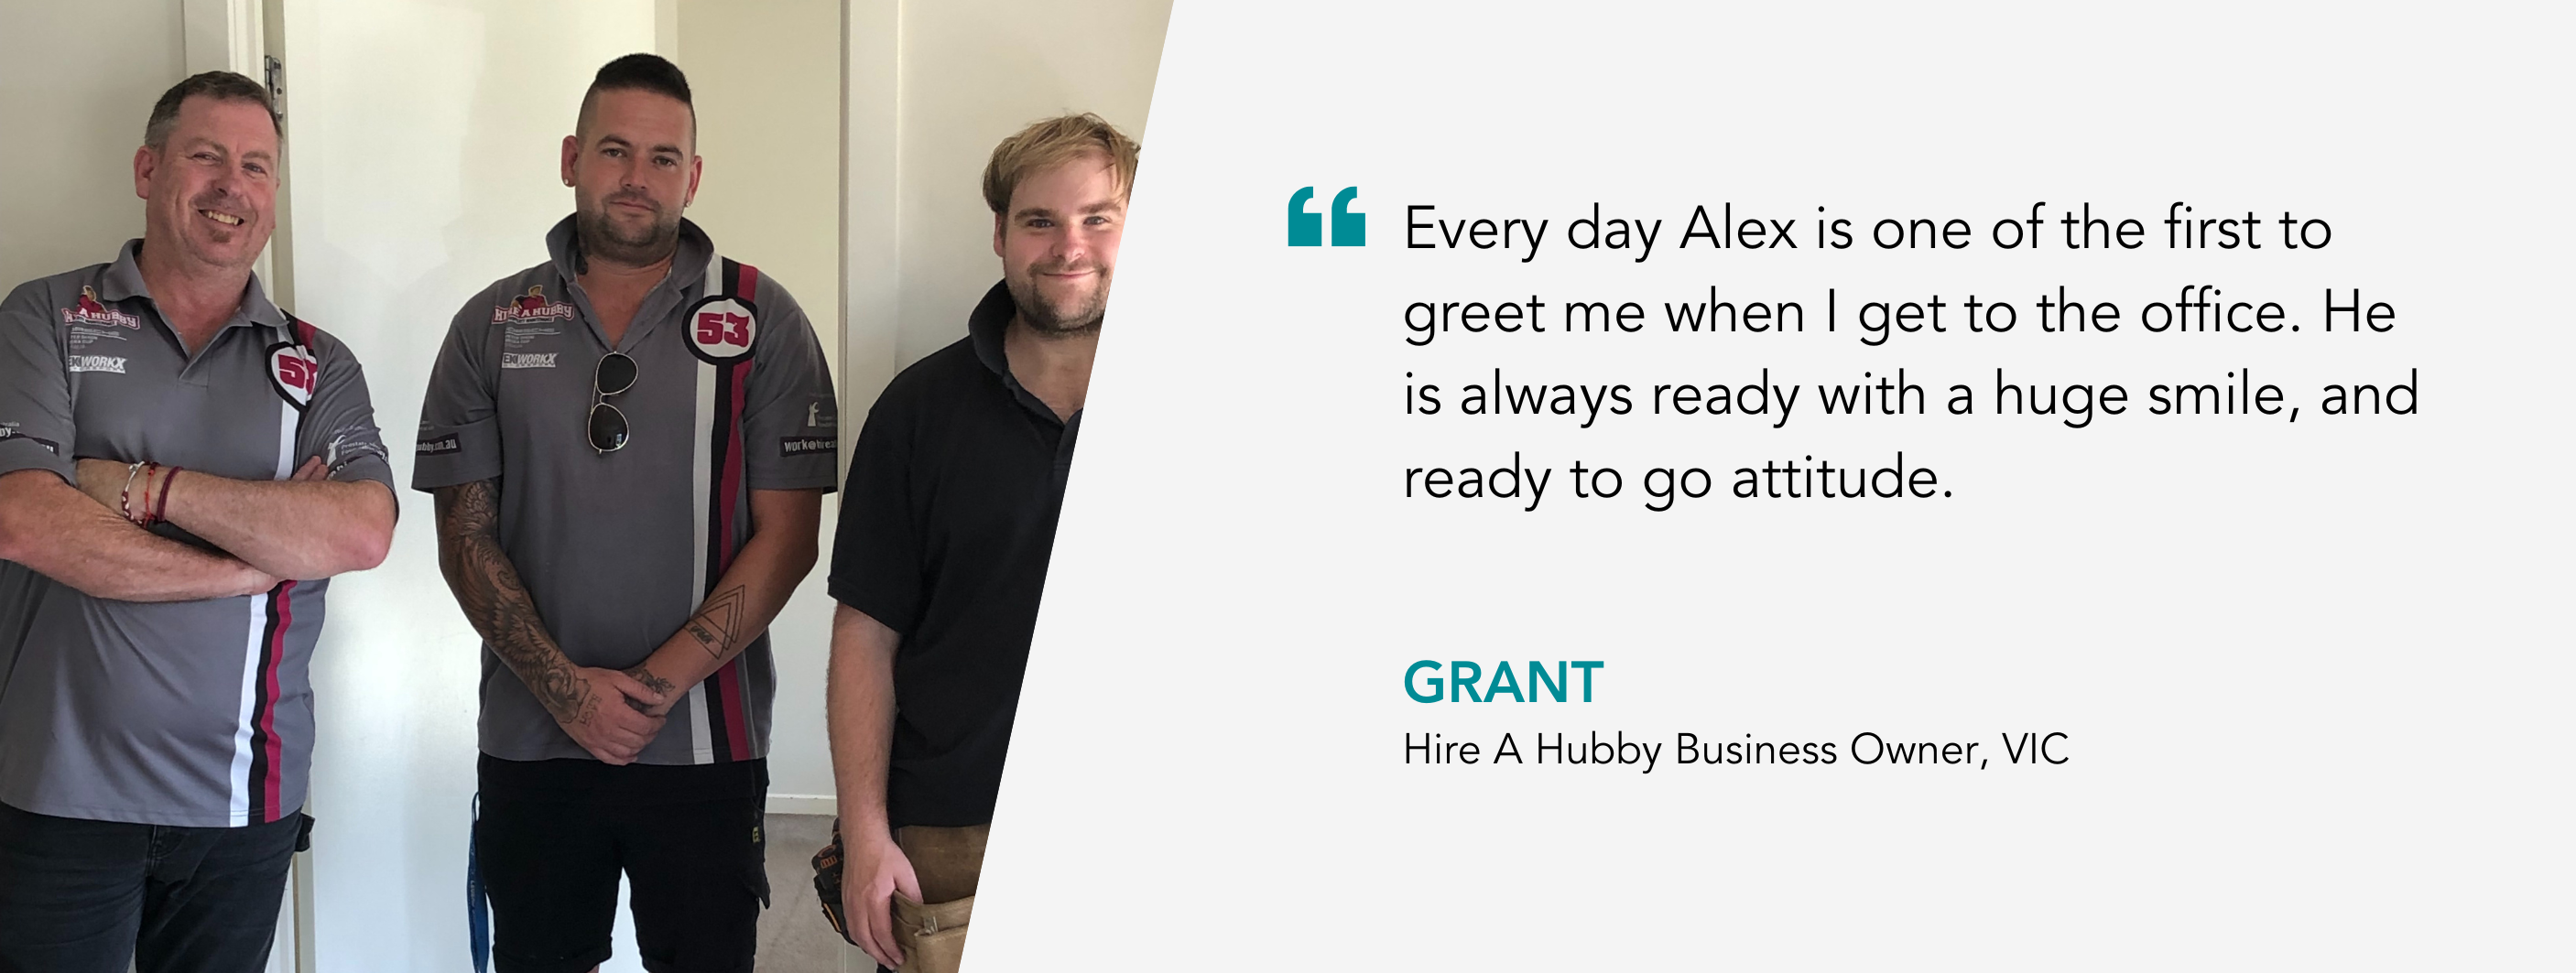 Every day Alex is one of the first to greet me when I get to the office. He is always ready with a huge smile, and ready to go attitude. Grant, Hire A Hubby Business Owner, VIC